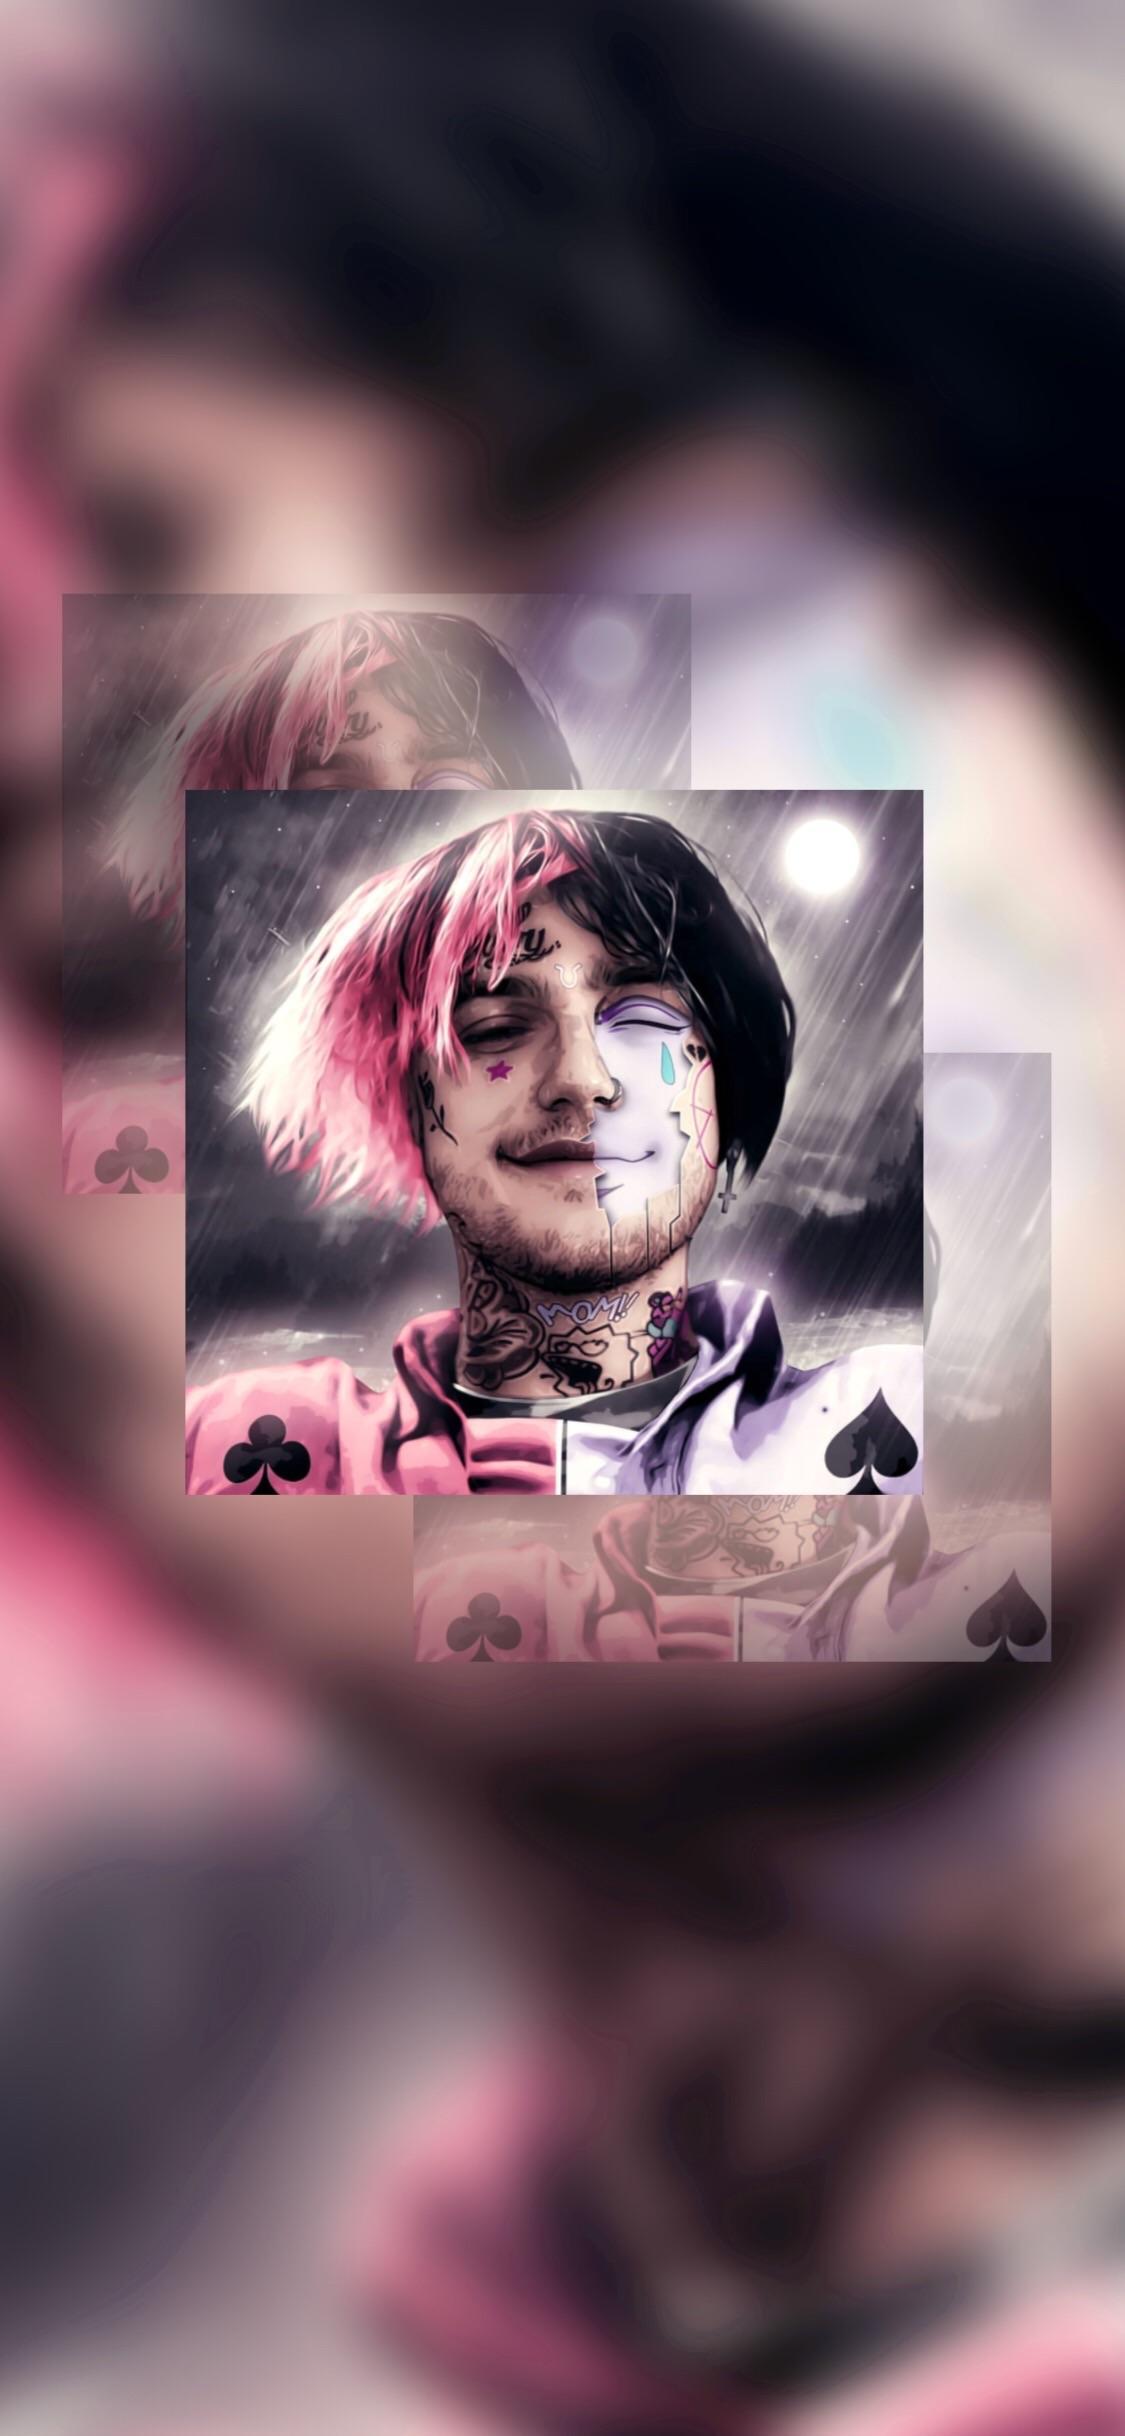 Made a Lil Peep wallpaper for the iPhone X, Thoughts?, UPVOTE if